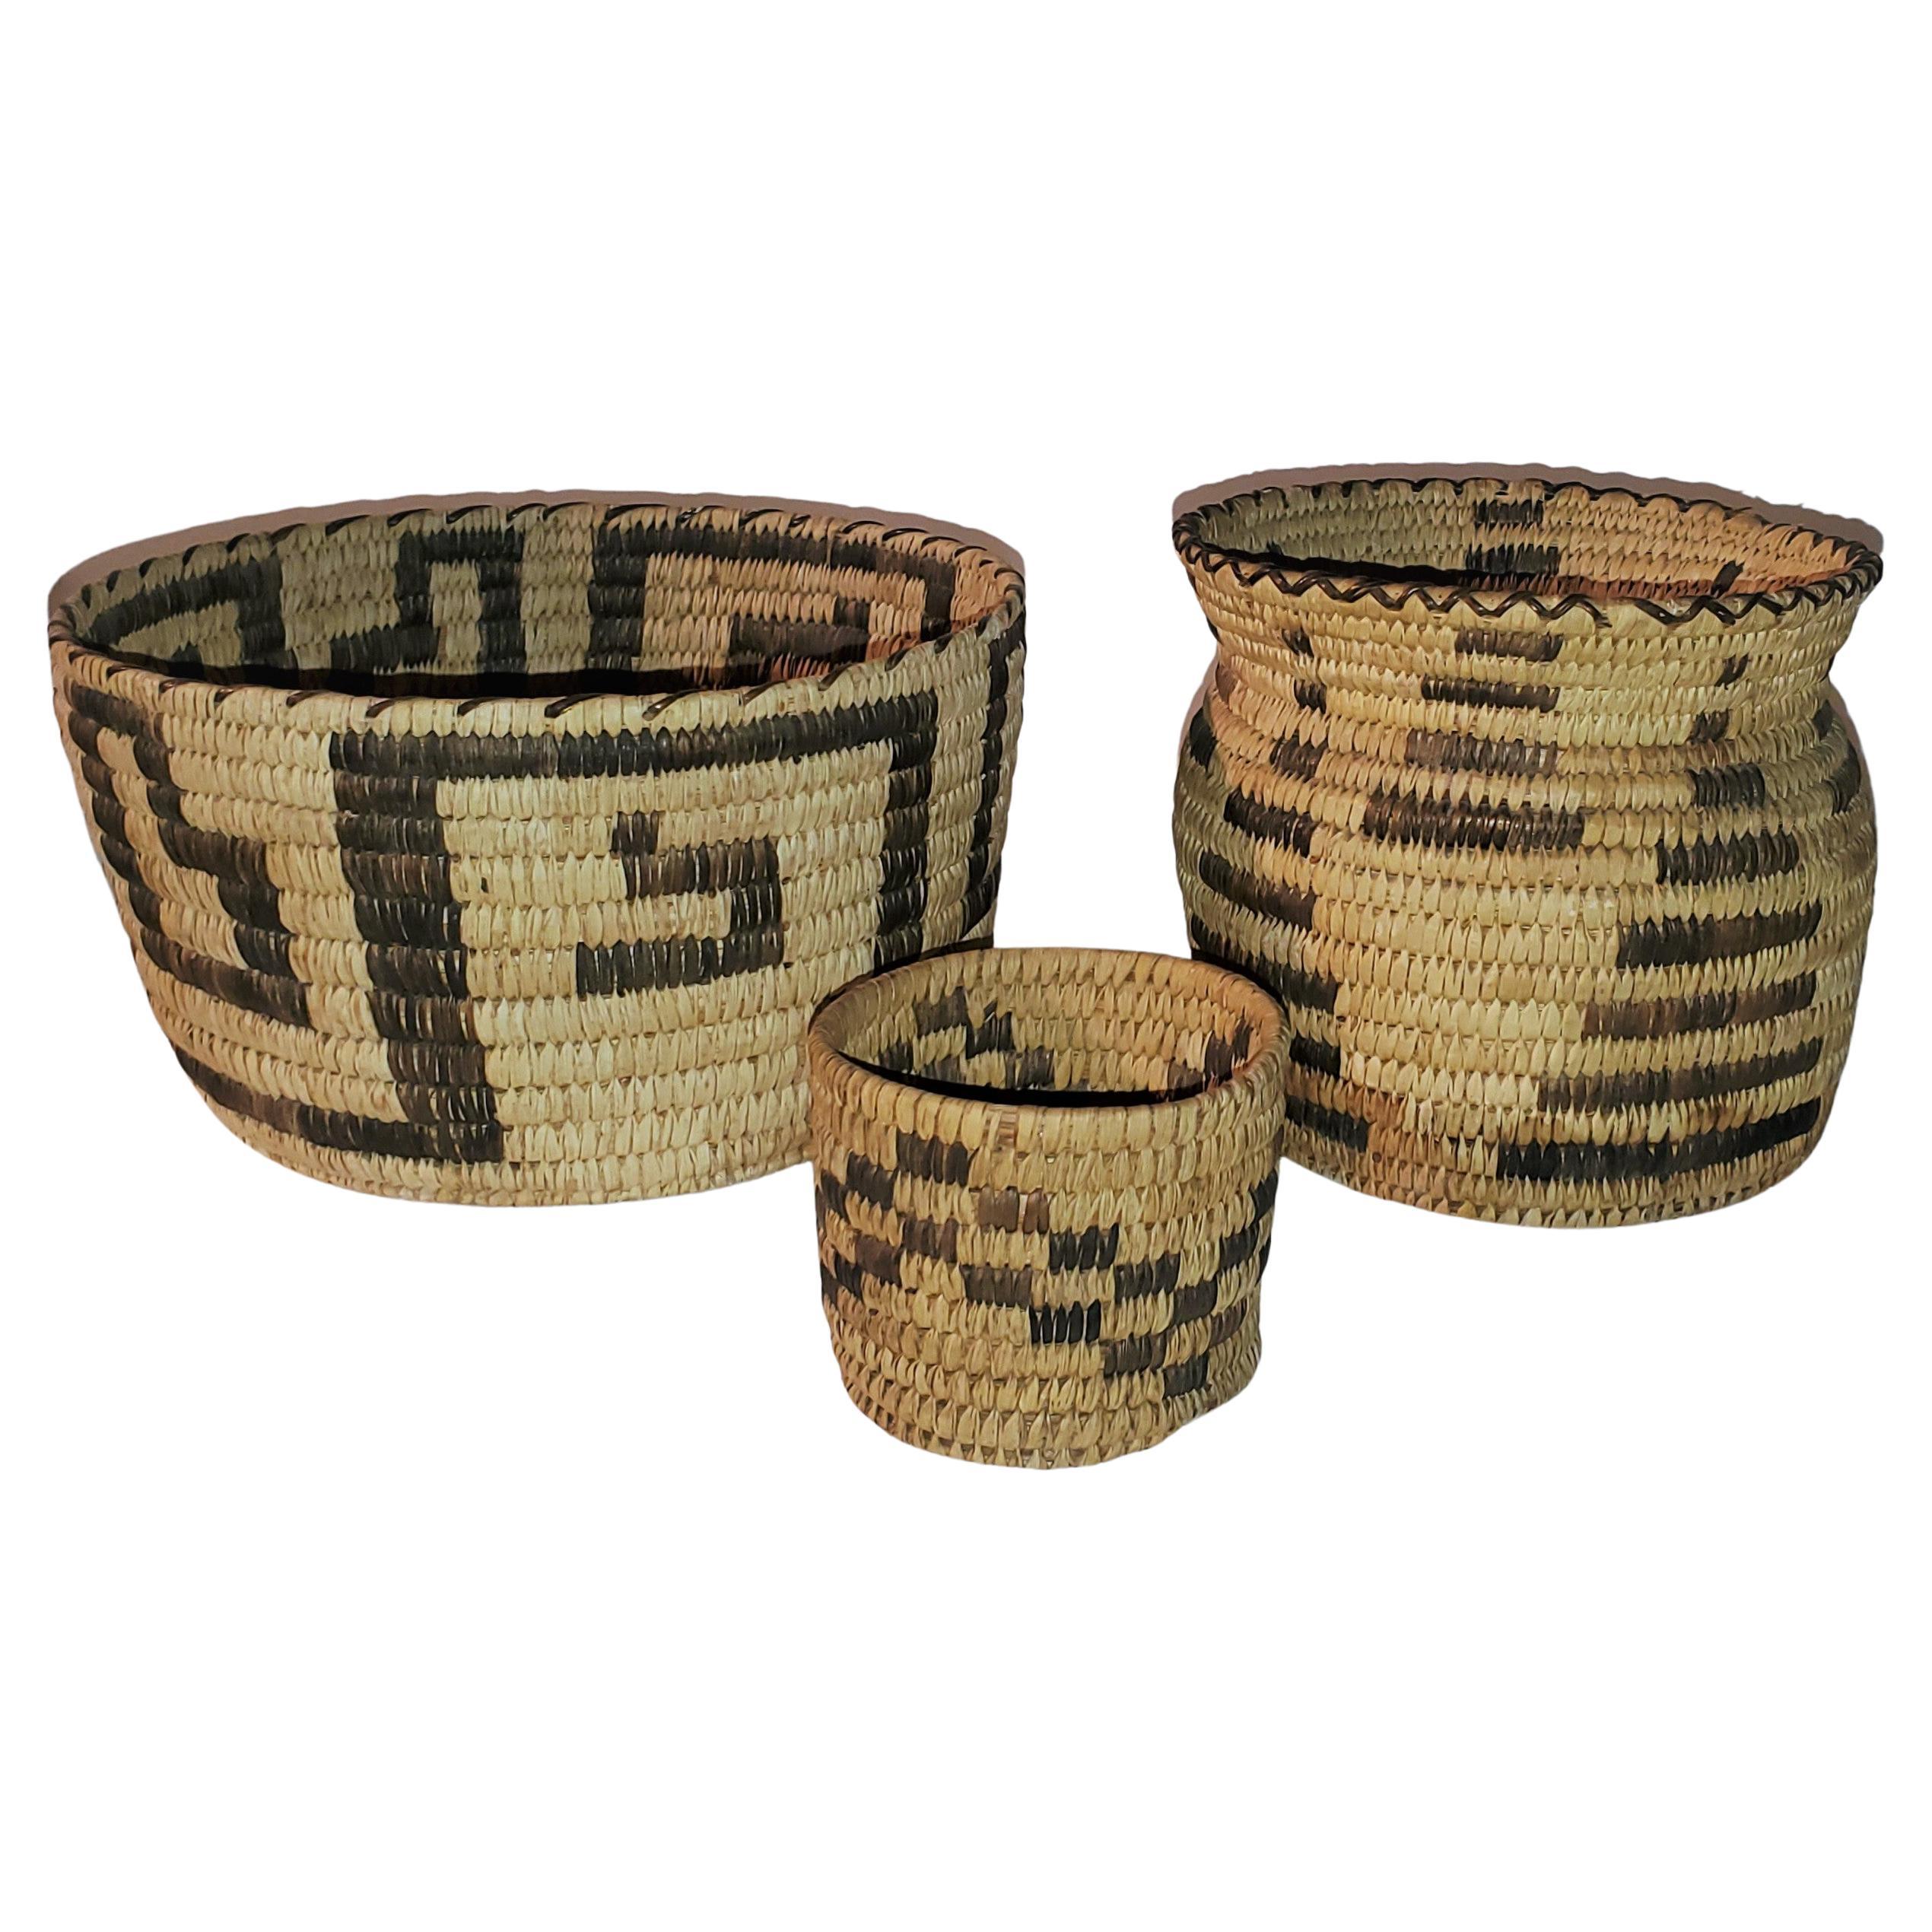 Papago Indian Baskets, Collection 3